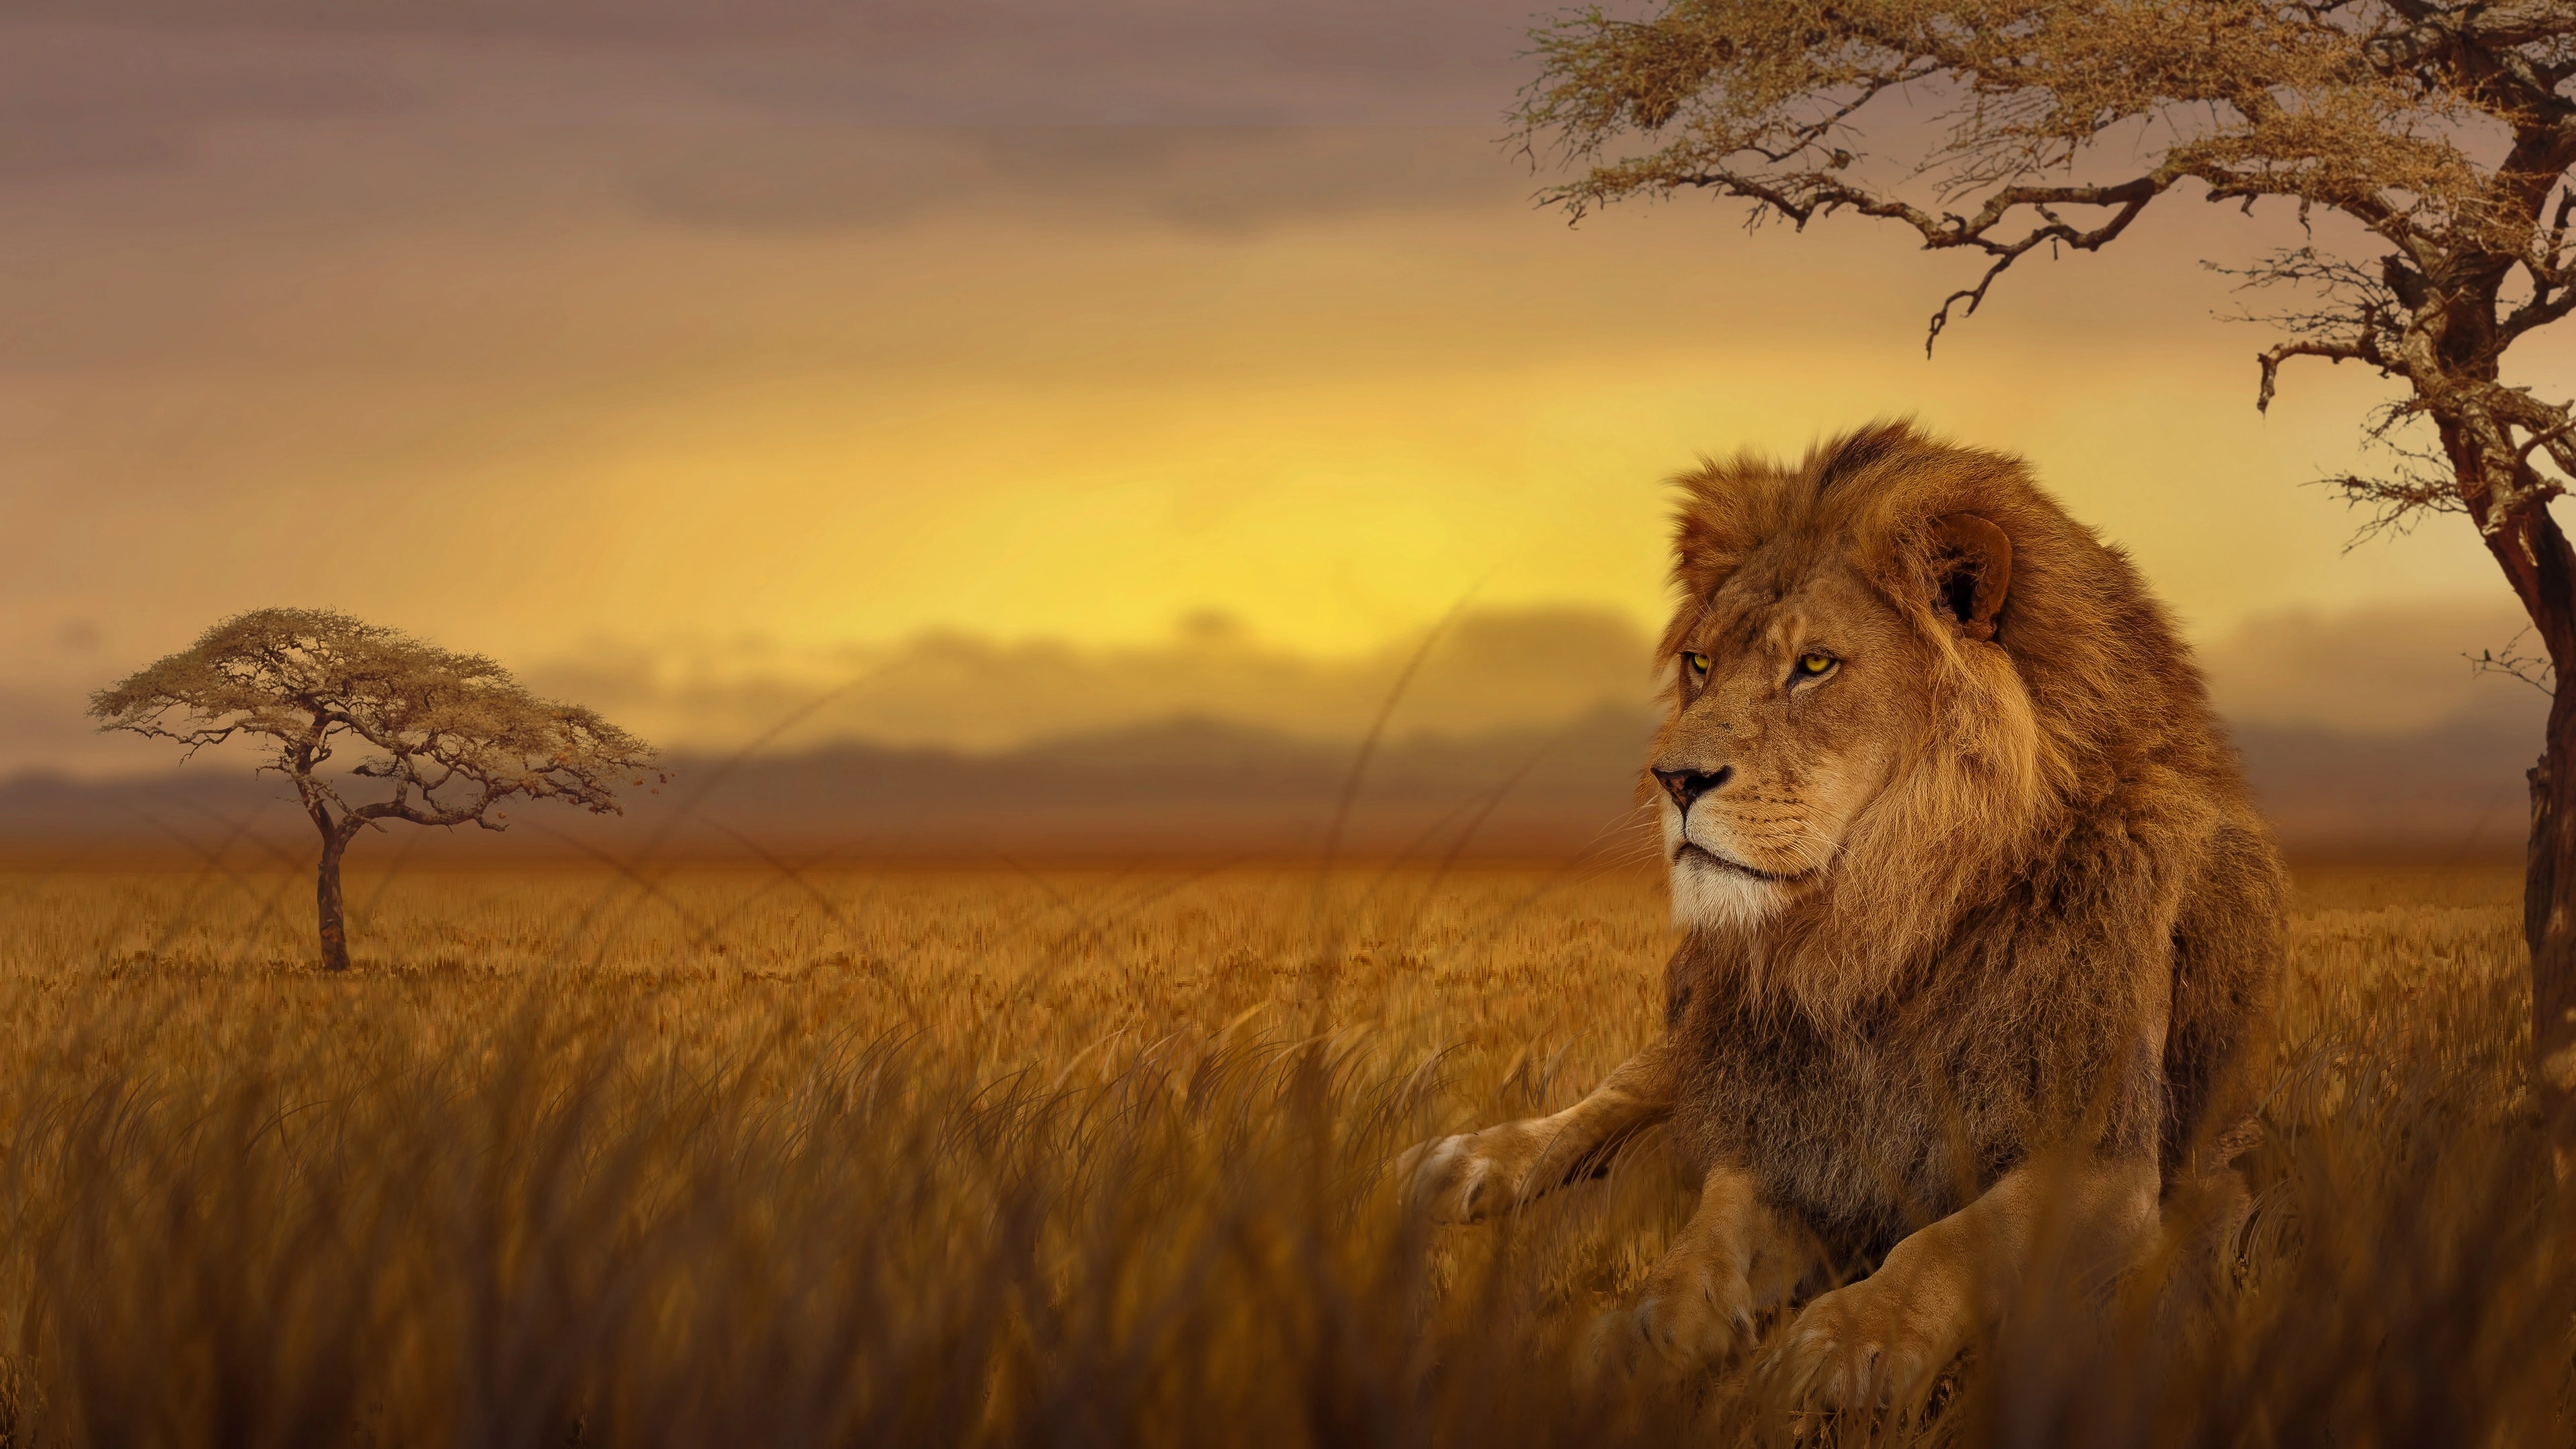 lion forest 4k 1542239116 - Lion Forest 4k - lion wallpapers, hd-wallpapers, forest wallpapers, animals wallpapers, 4k-wallpapers